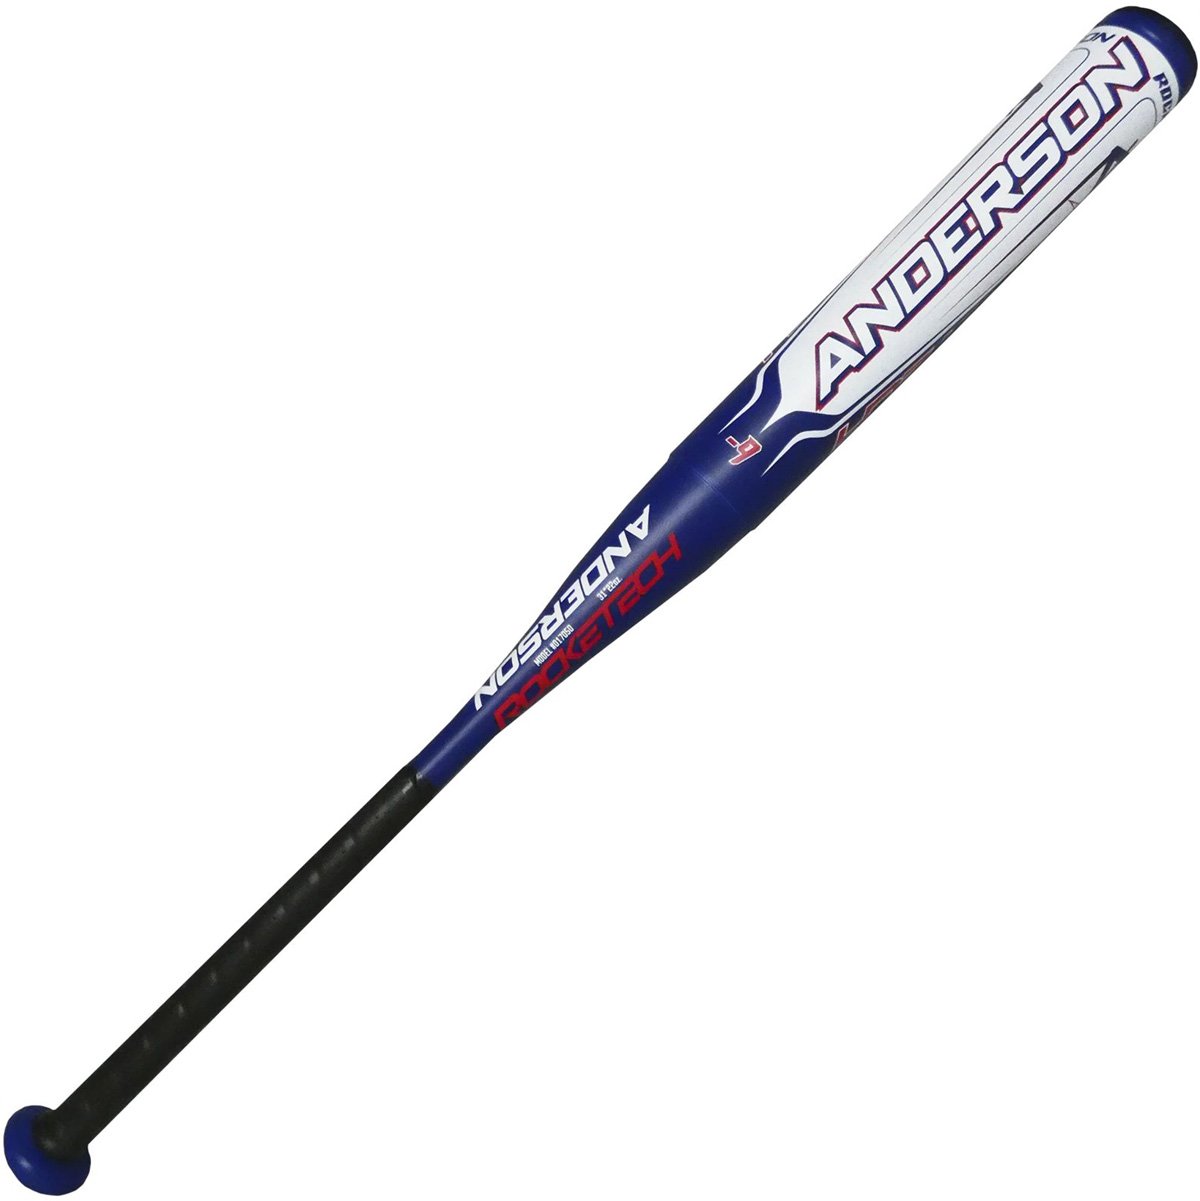 The Anderson Rocketech has spent almost two decades dominating the fastpitch market. While developing the reputation of being a bat that is known for its incredible pop, the Rocketech is also known for having strength and durability that is second to none. When you swing a Rocketech you are choosing the “OG” of high performance softball bats!   Features:  Available in 31-34 inches Double wall design delivers maximum performance 12” outer sleeve surrounding the barrel gives industry leading durability    Specs:  2 ¼ Barrel Diameter -9 Drop Weight Designed and Constructed from 7075 Alloy Approved for play in; USA/ASA, USSSA, ISA, NSA, NCAA 